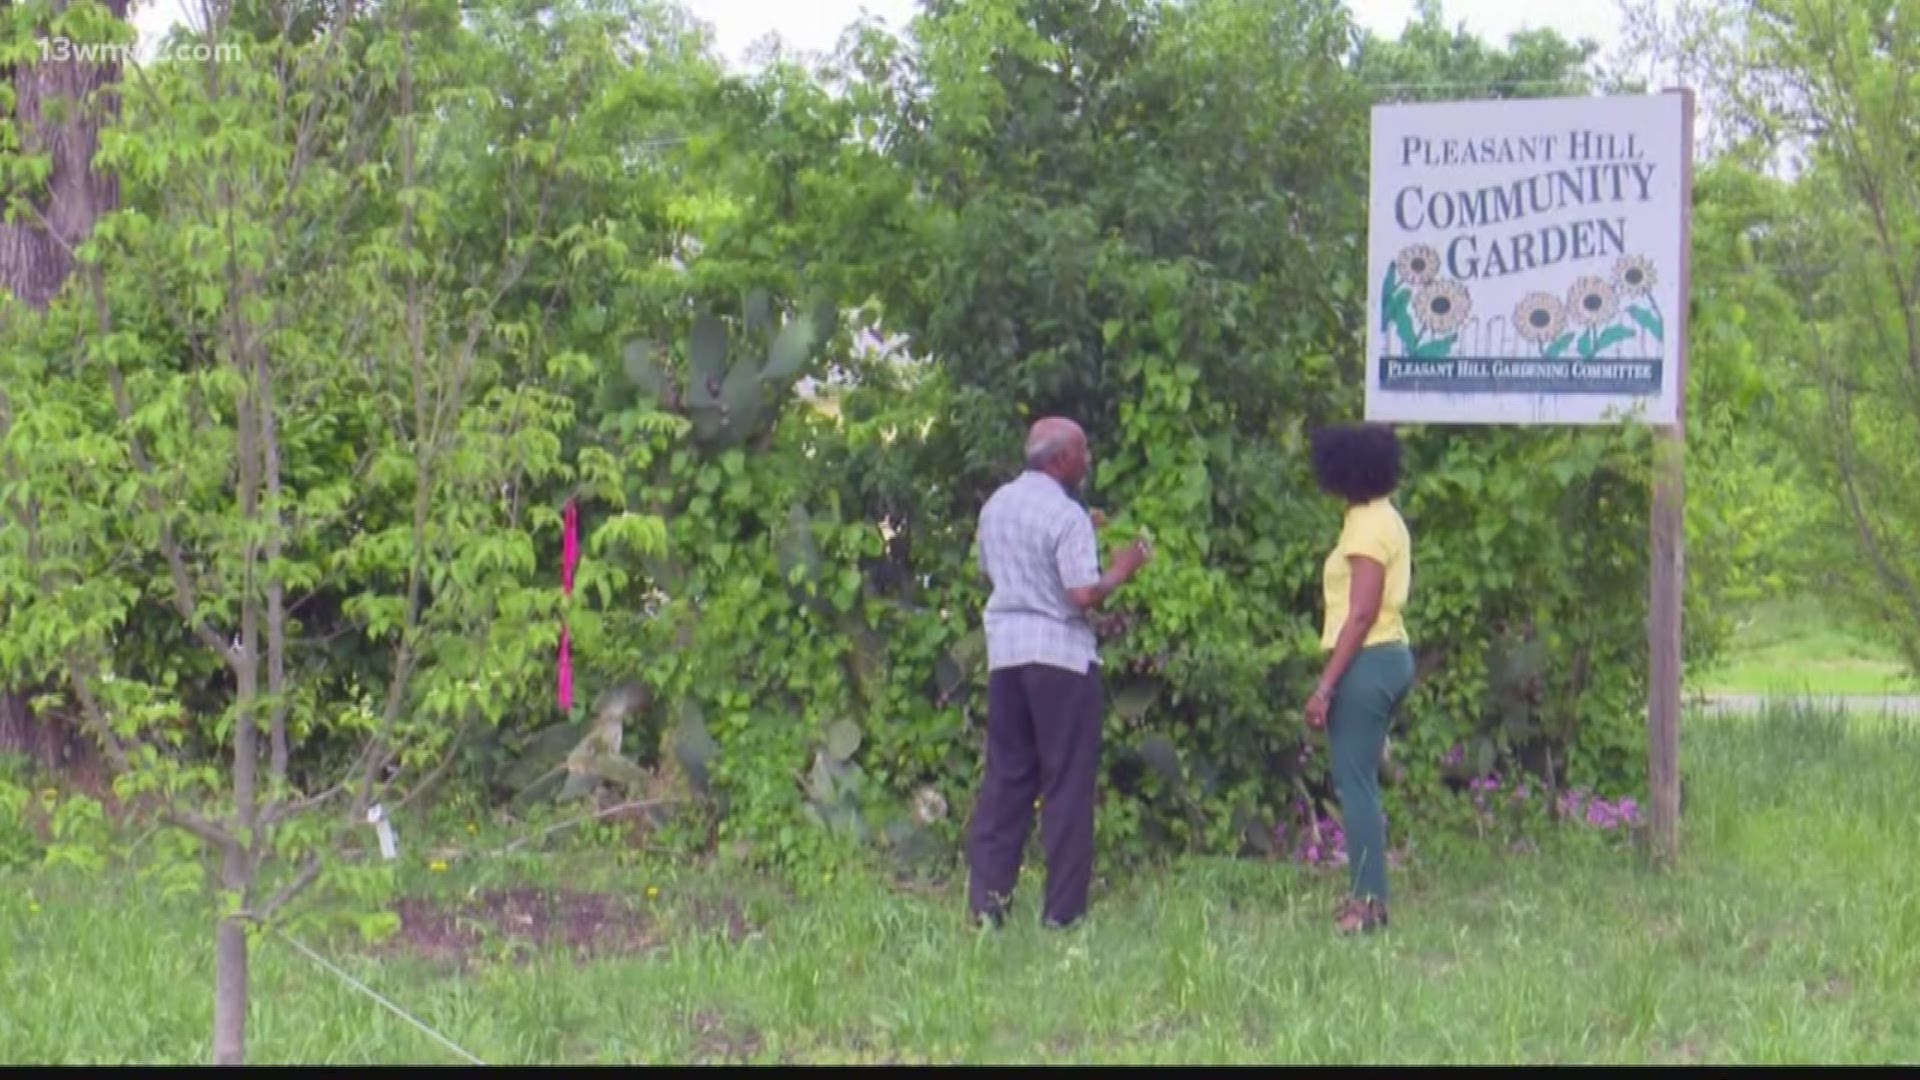 Close to downtown Macon, a group of neighbors are growing relationships along with fresh vegetables. It's in an area known as a food desert because of a lack of access to grocery stores.